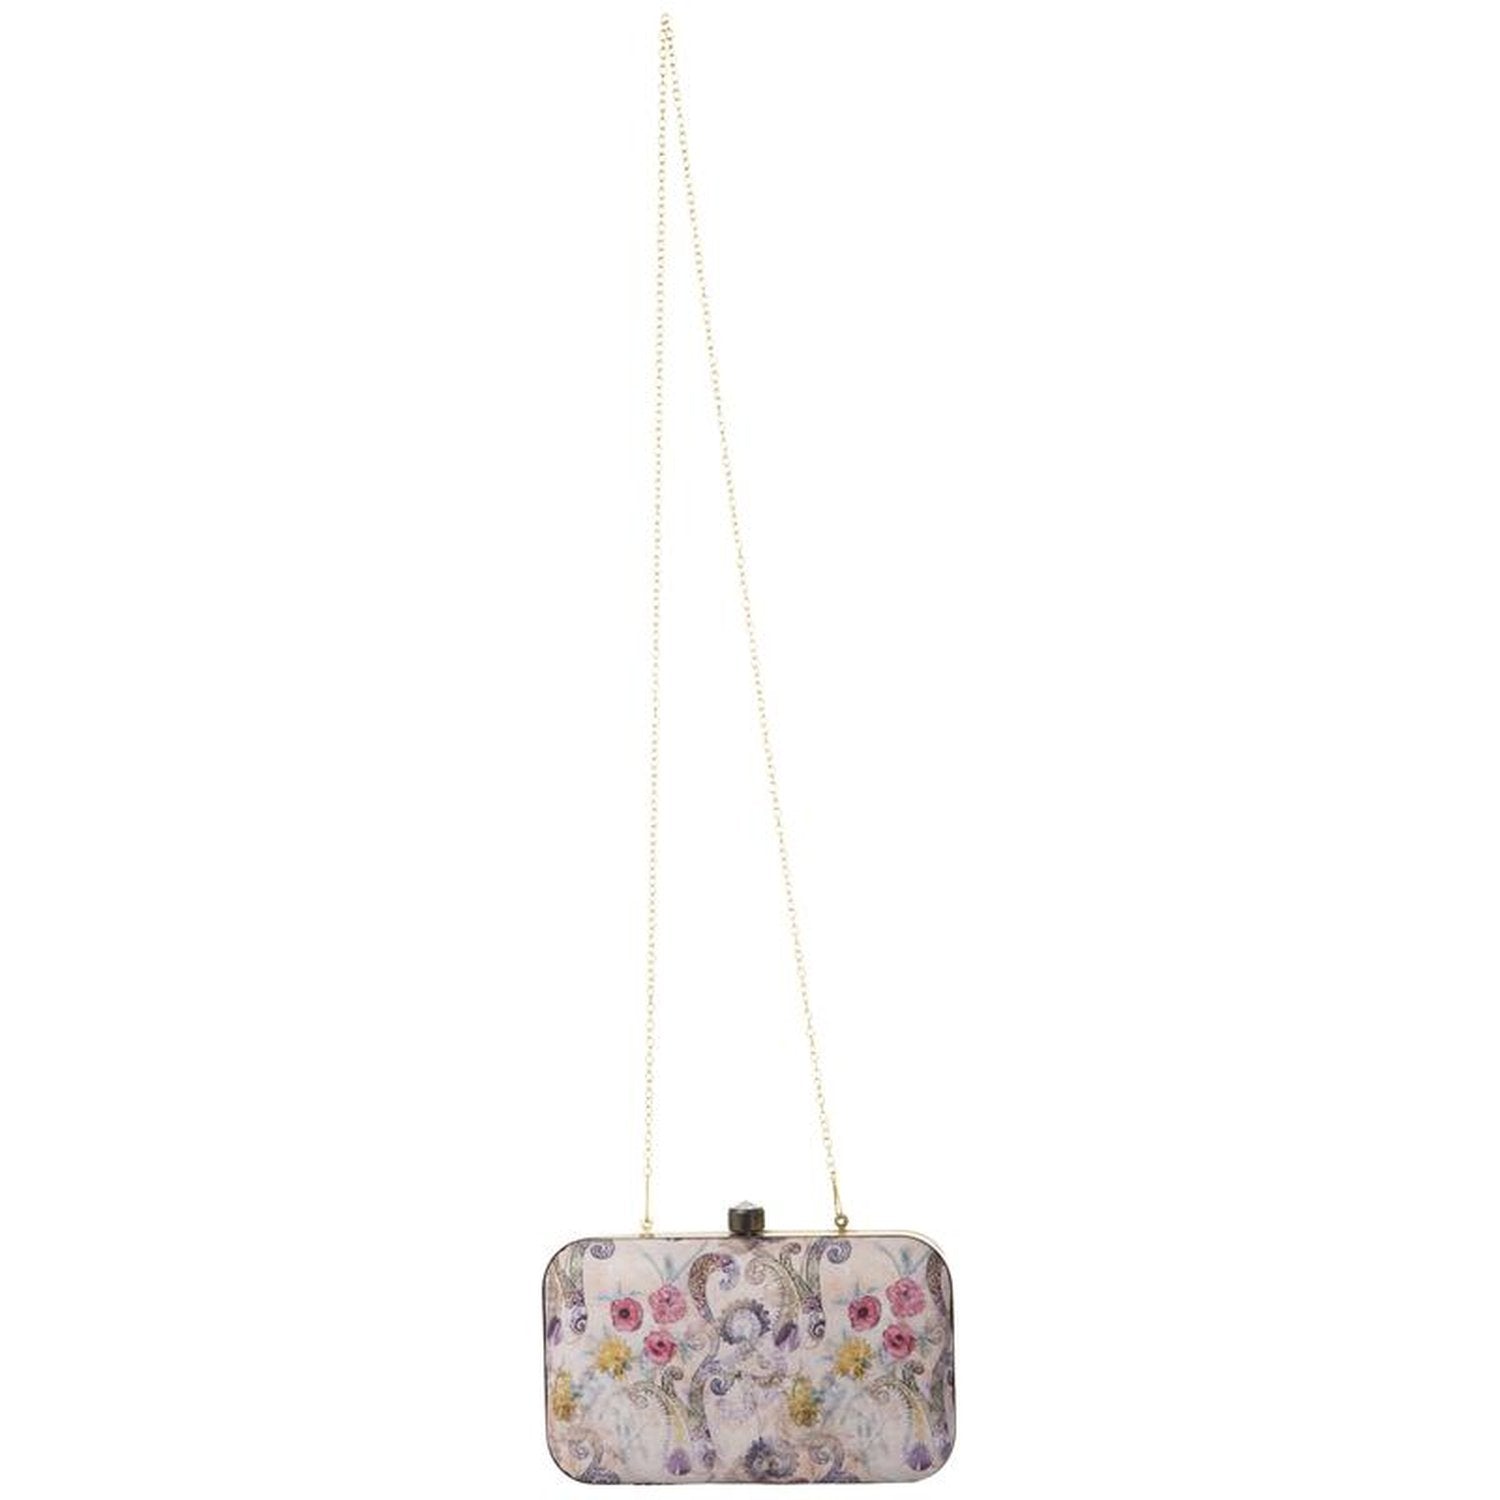 Colourful Floral Embroidery Purse with Zipper - WBG0419 - WBG0419 at Rs  50.15 | Gifts for all occasions by Wedtree